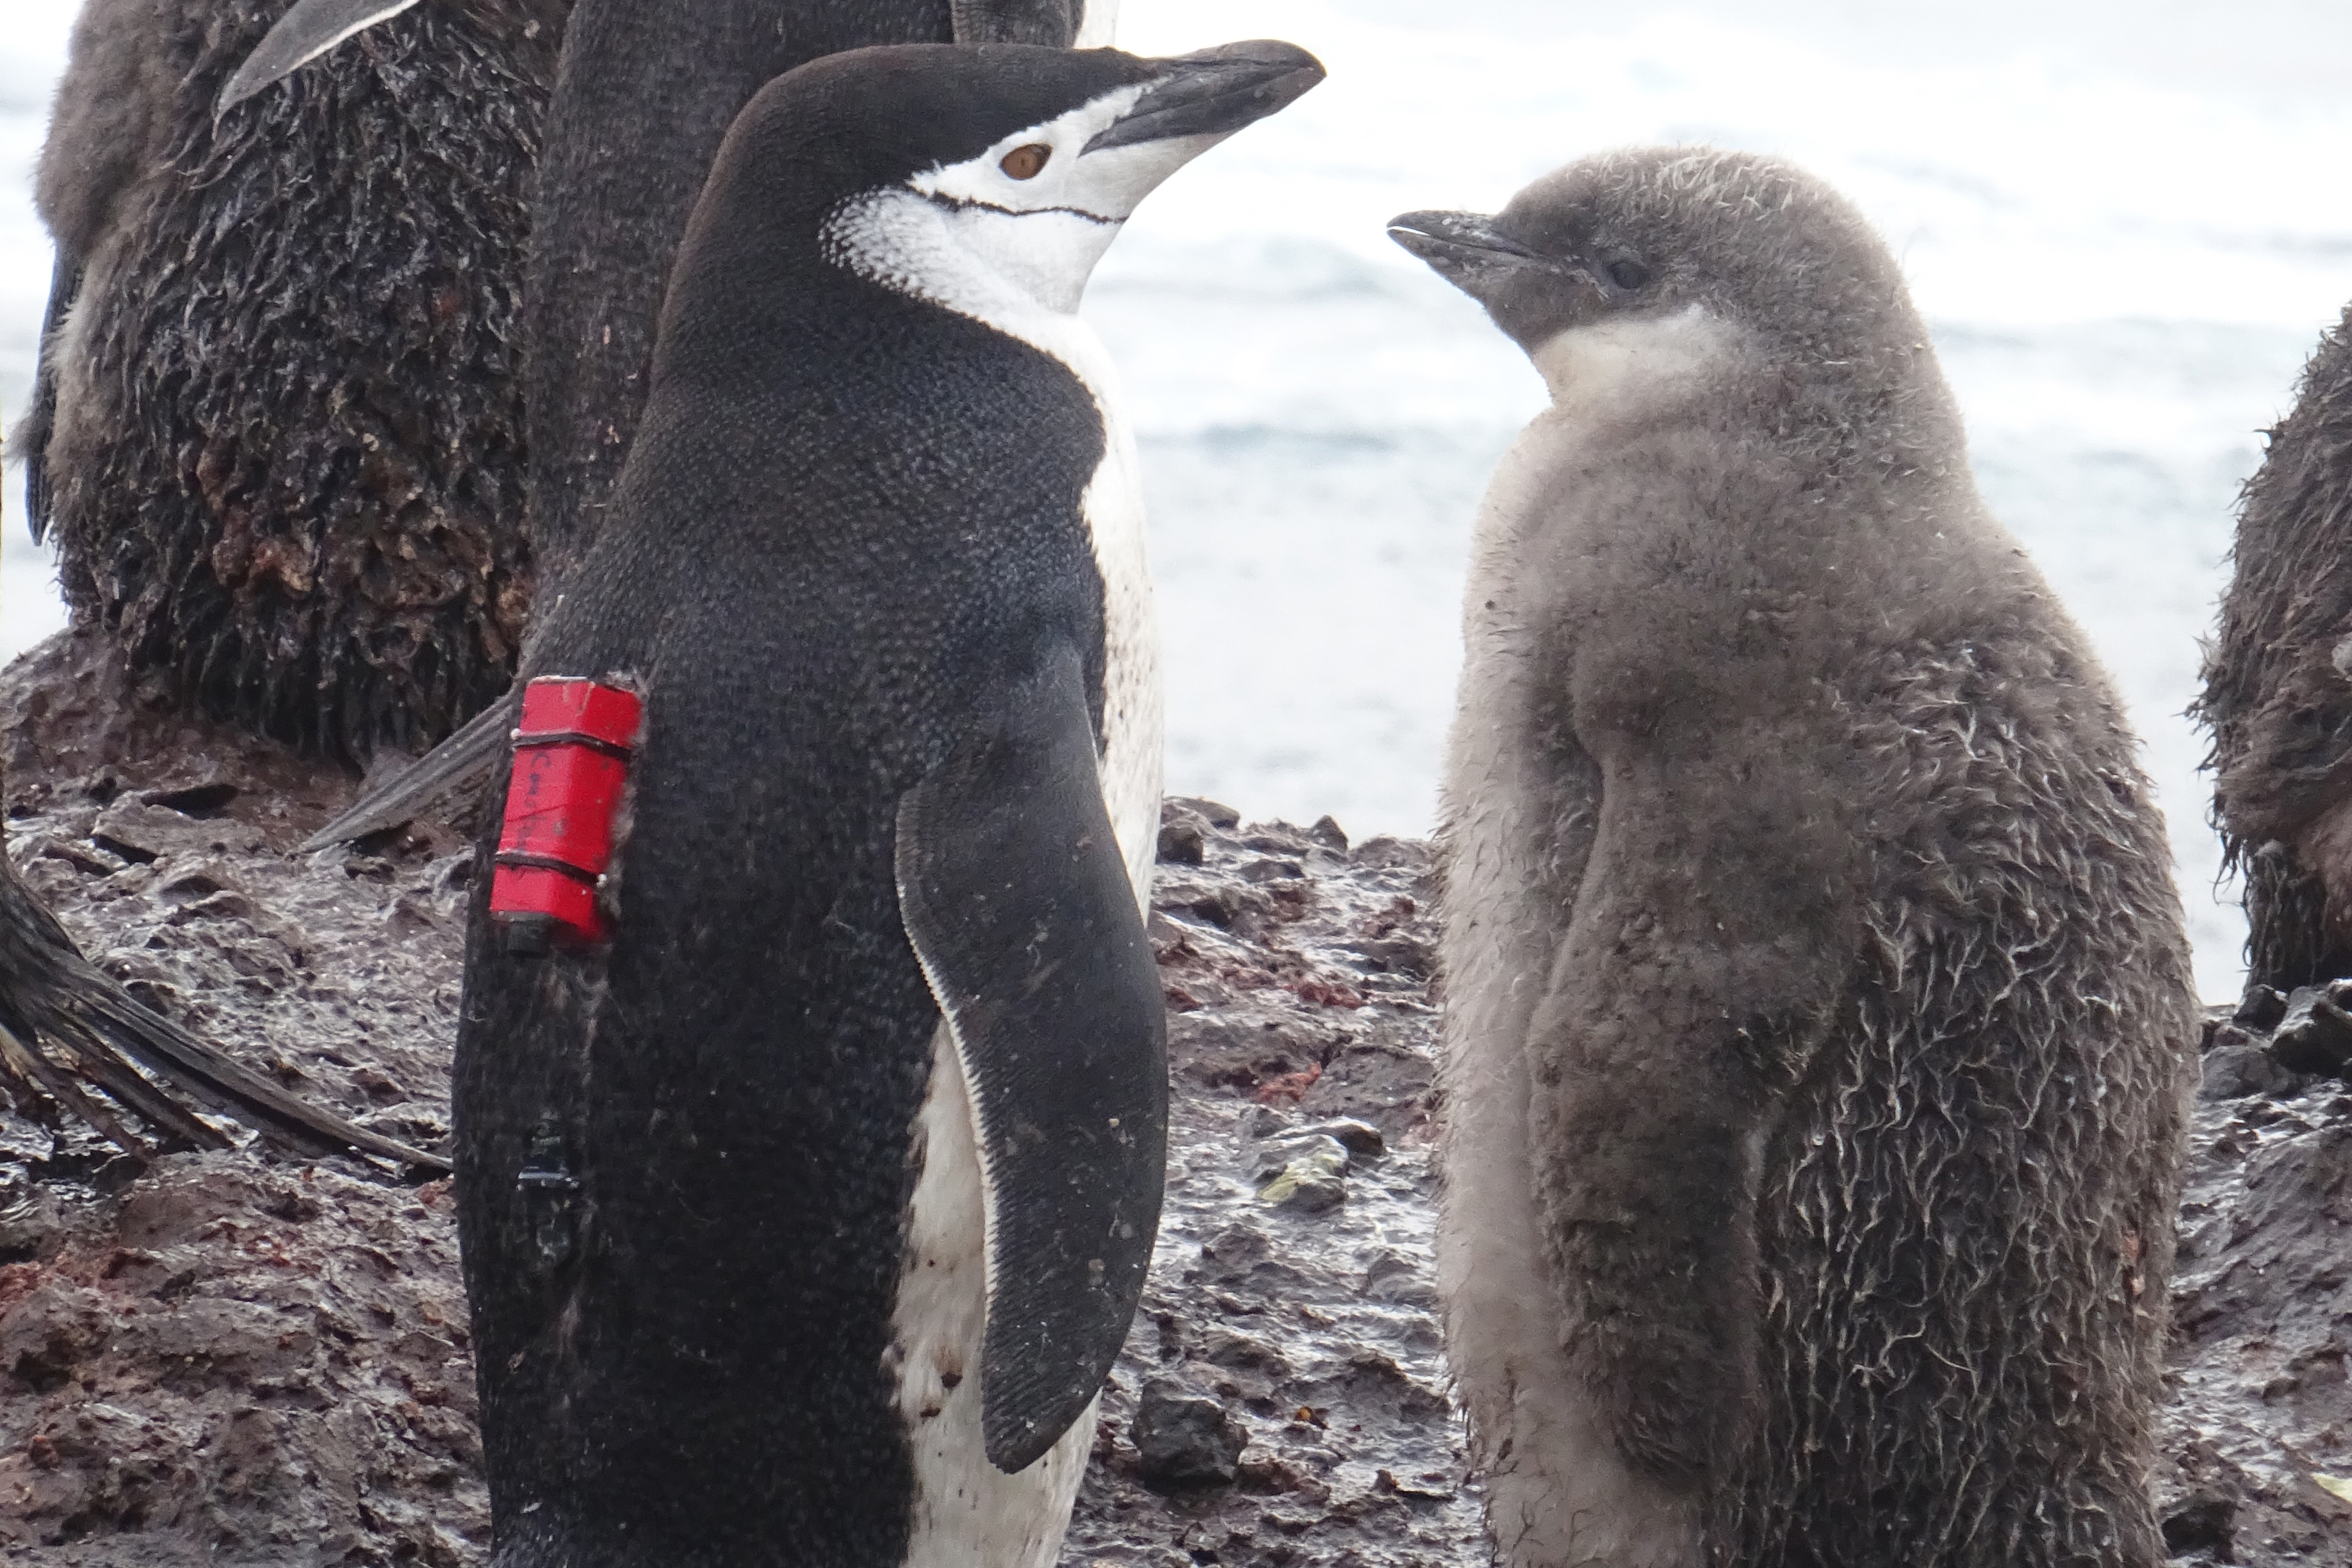 Image: New Data Show That Penguins in Antarctica May Prefer Dining with Friends to Dining Alone 